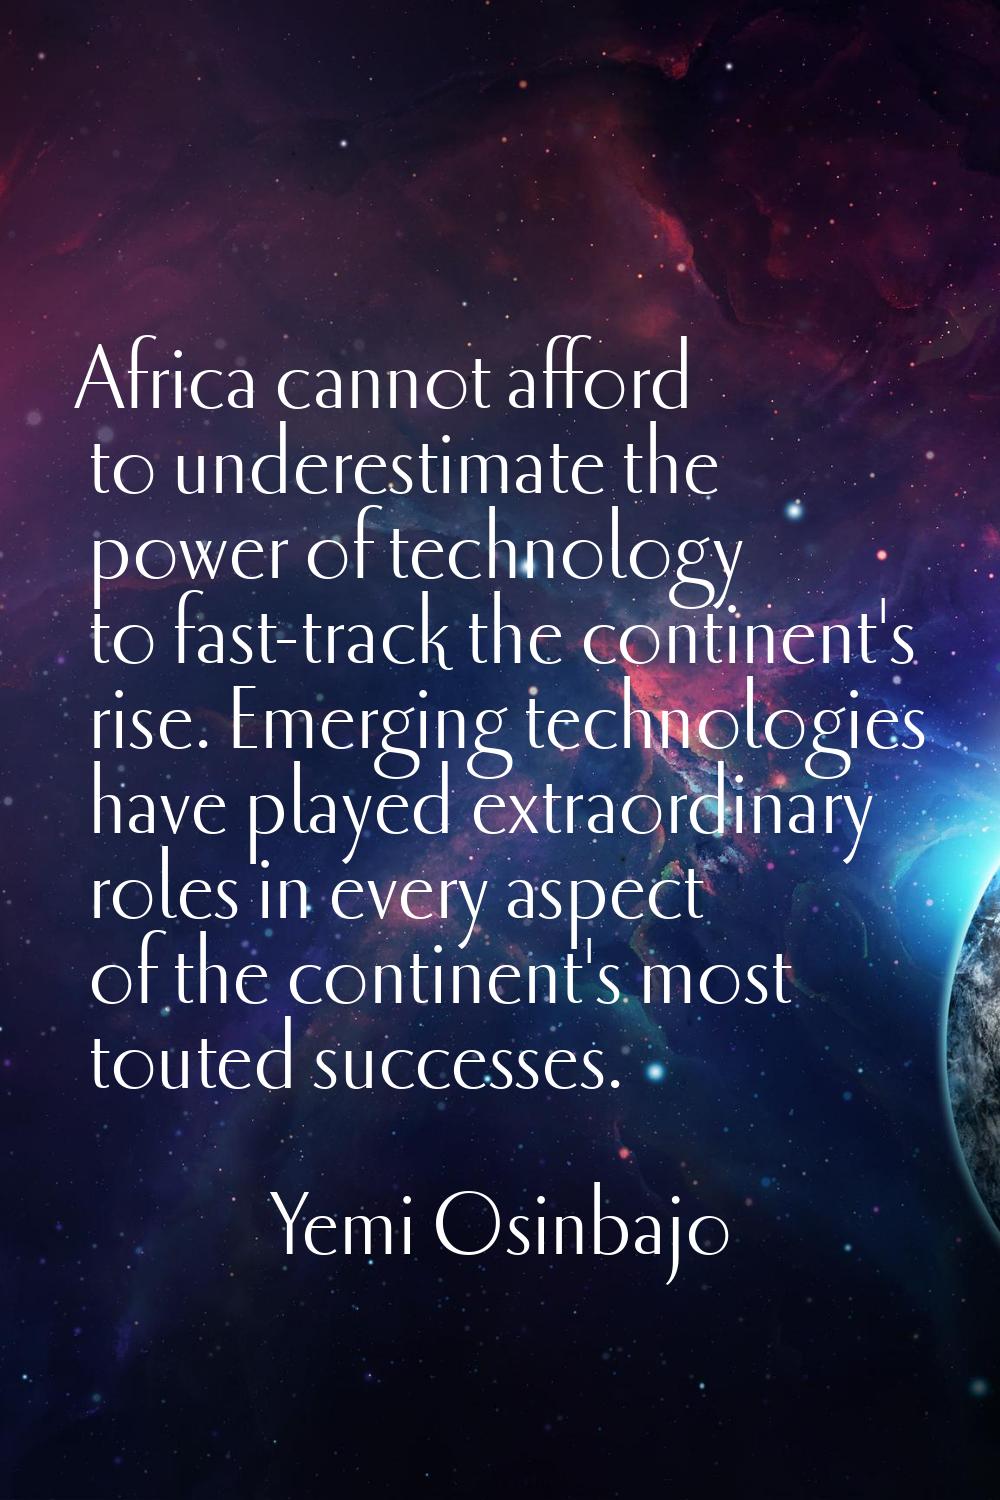 Africa cannot afford to underestimate the power of technology to fast-track the continent's rise. E